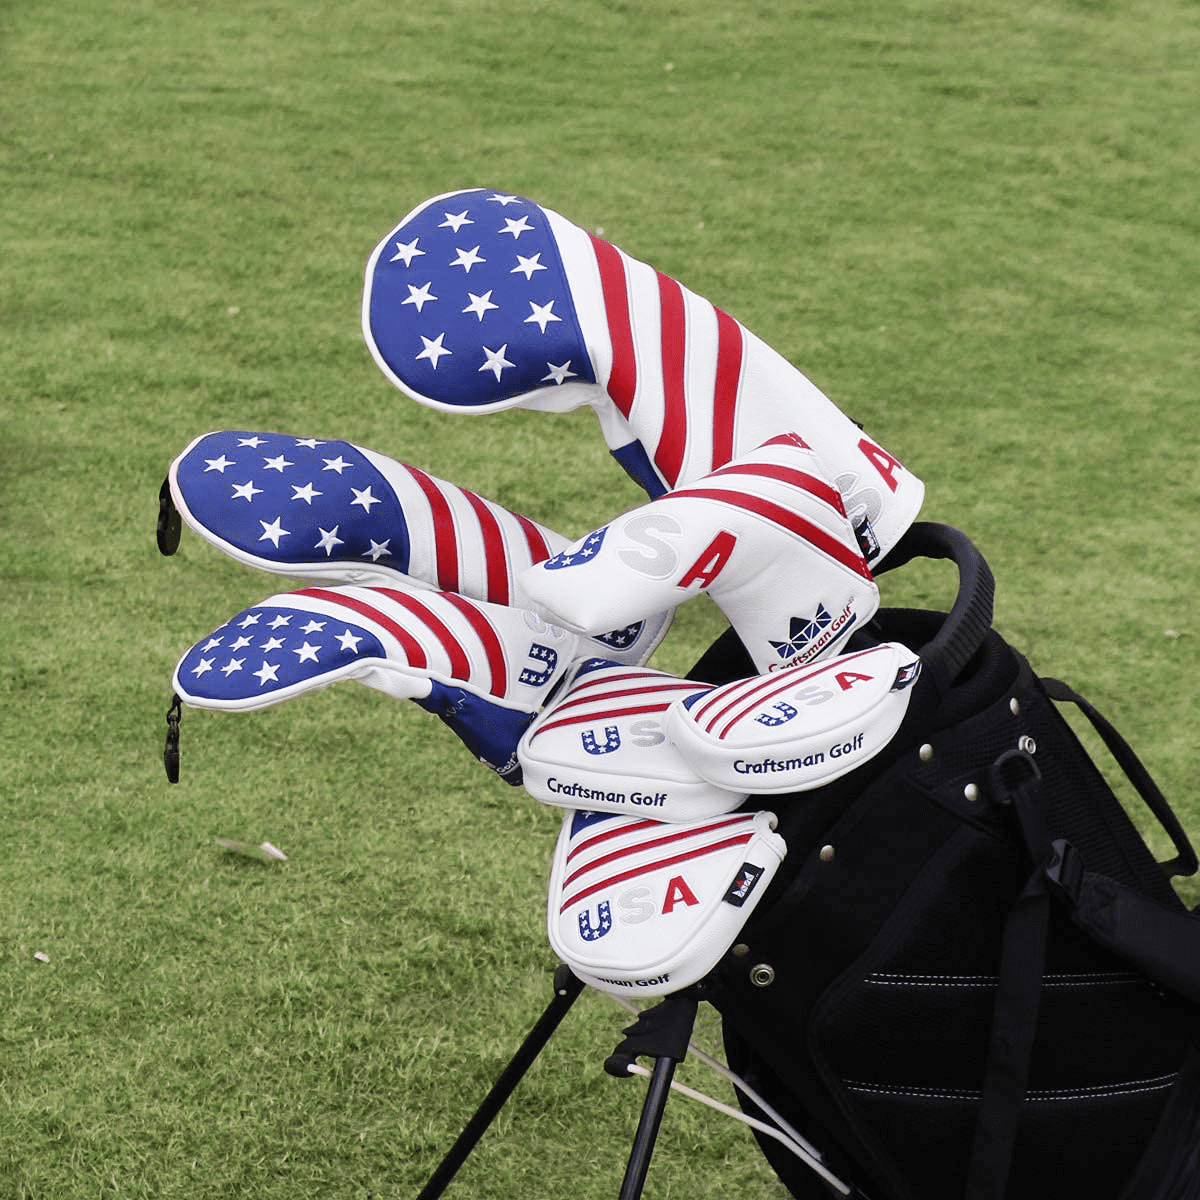 red white and blue golf club headcover sets in golf bag